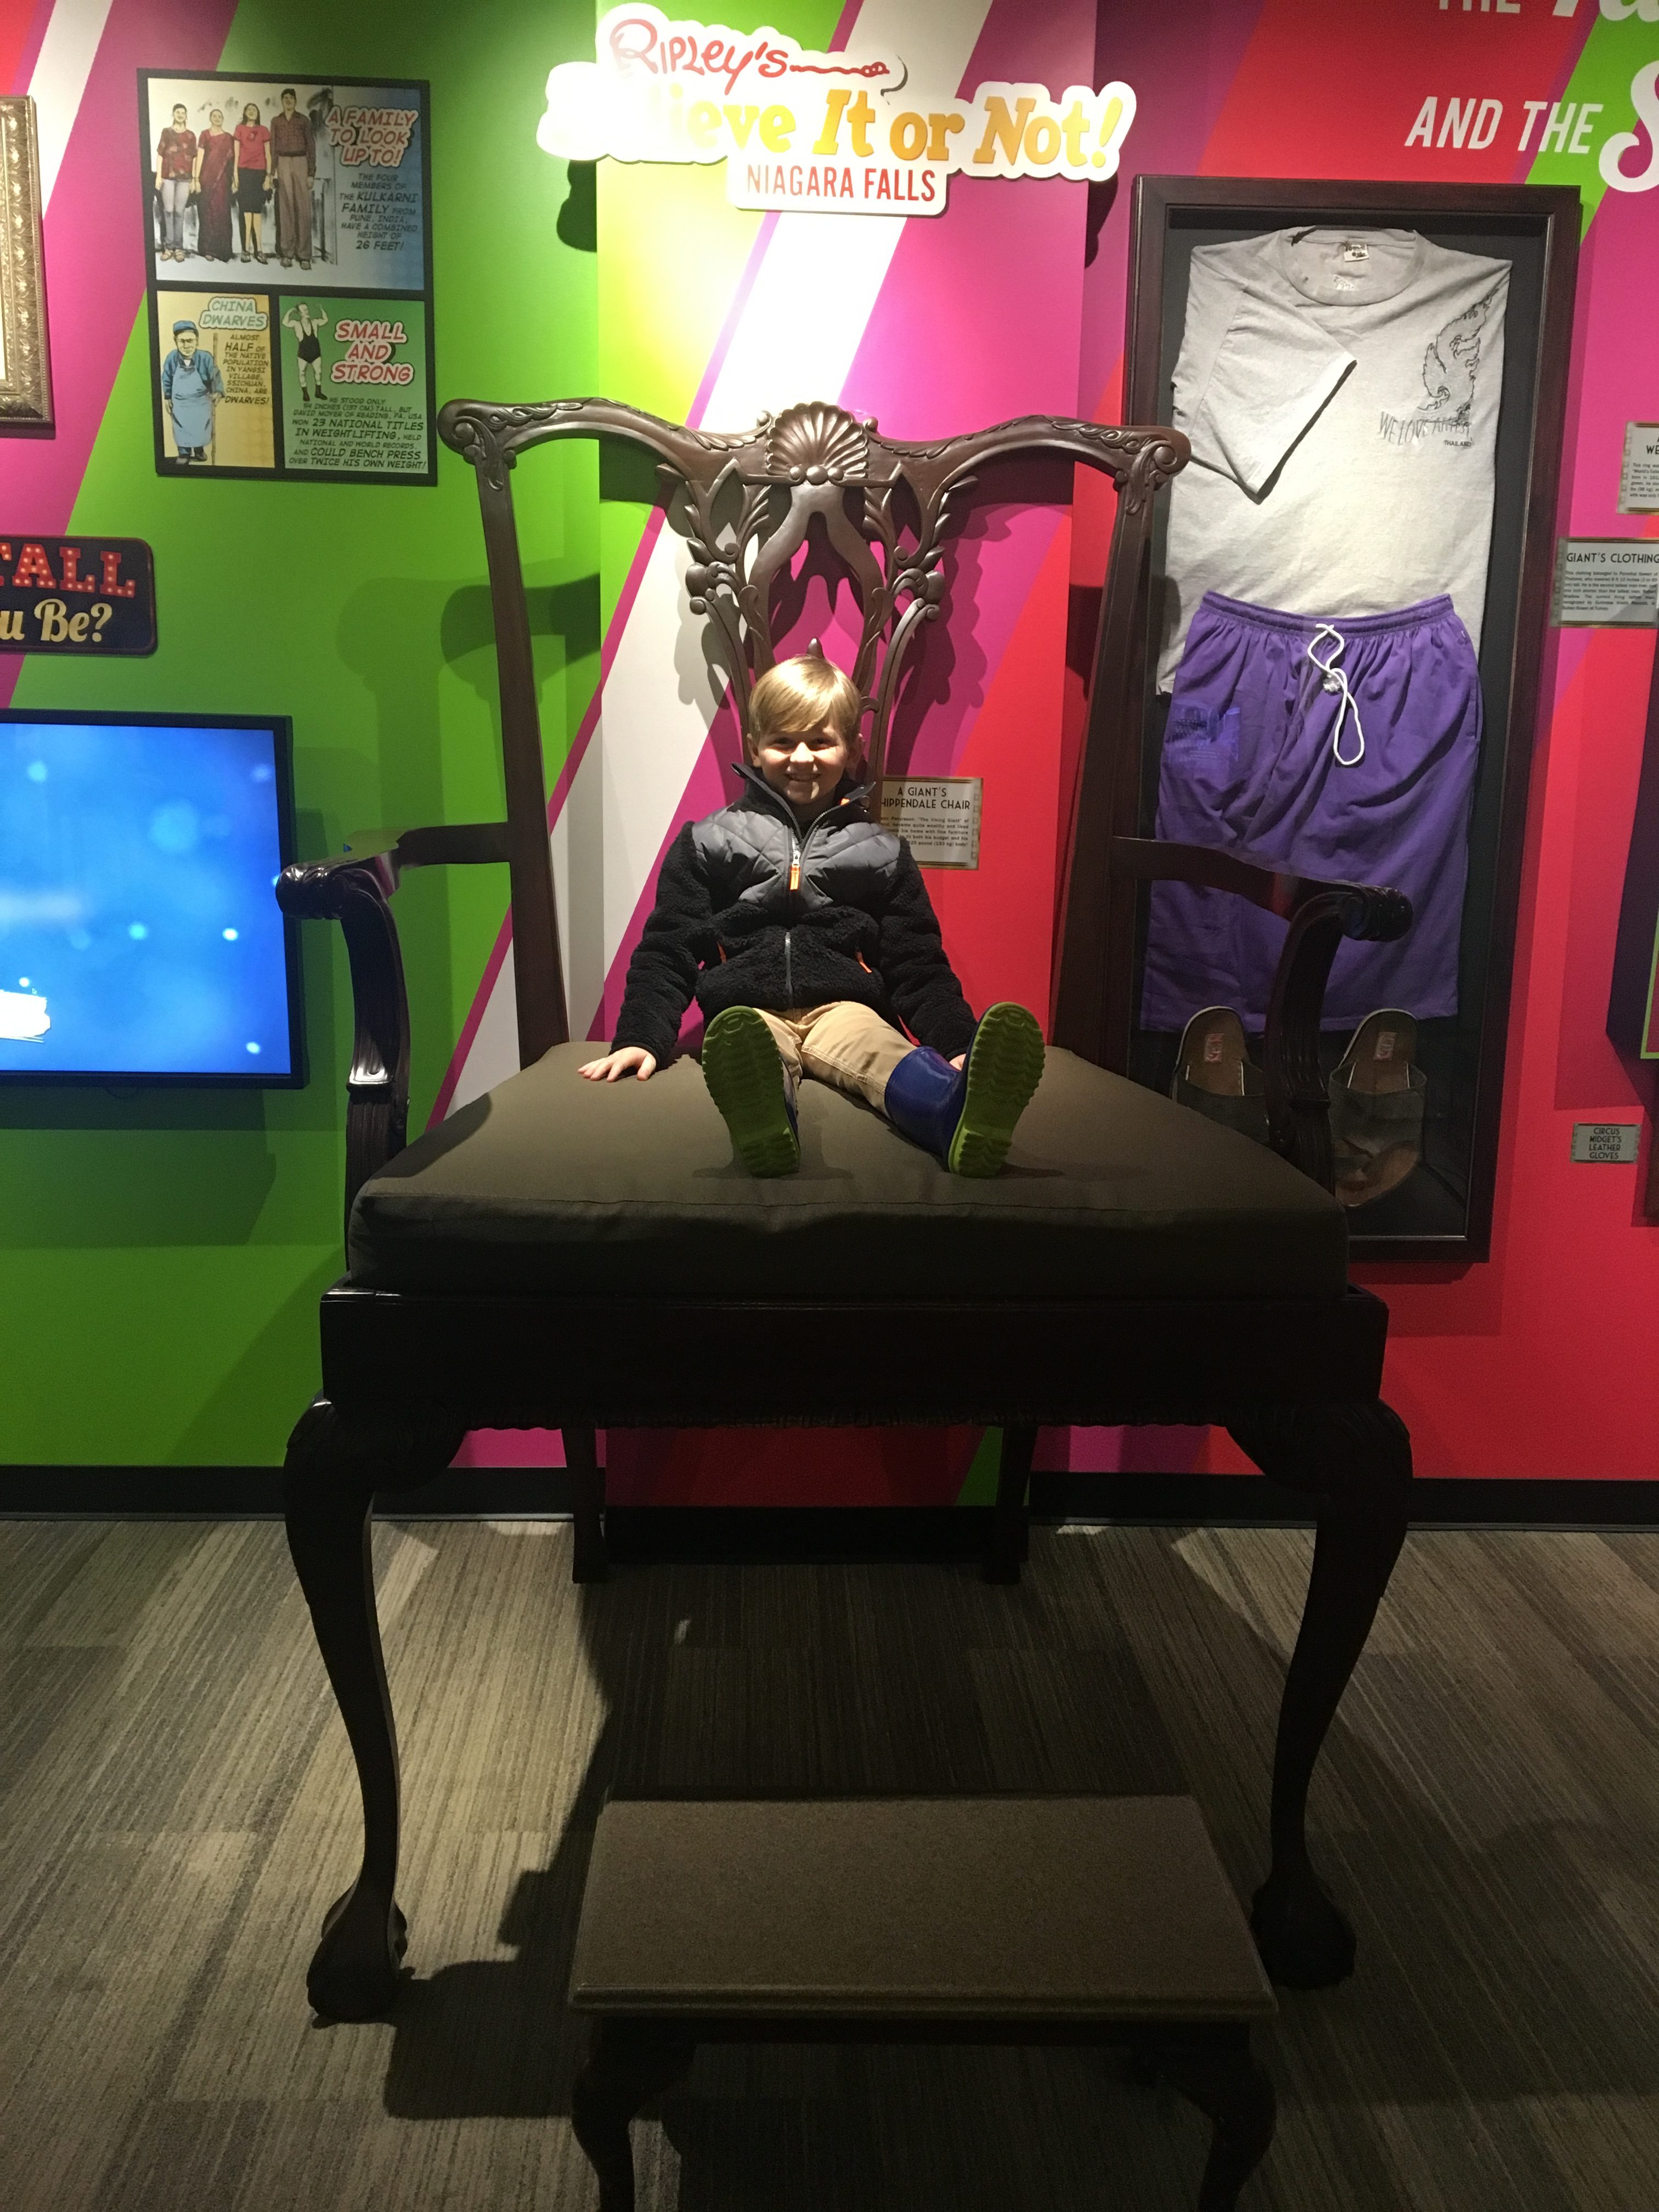 ripley's believe it or not | canada | activities for kids in niagara